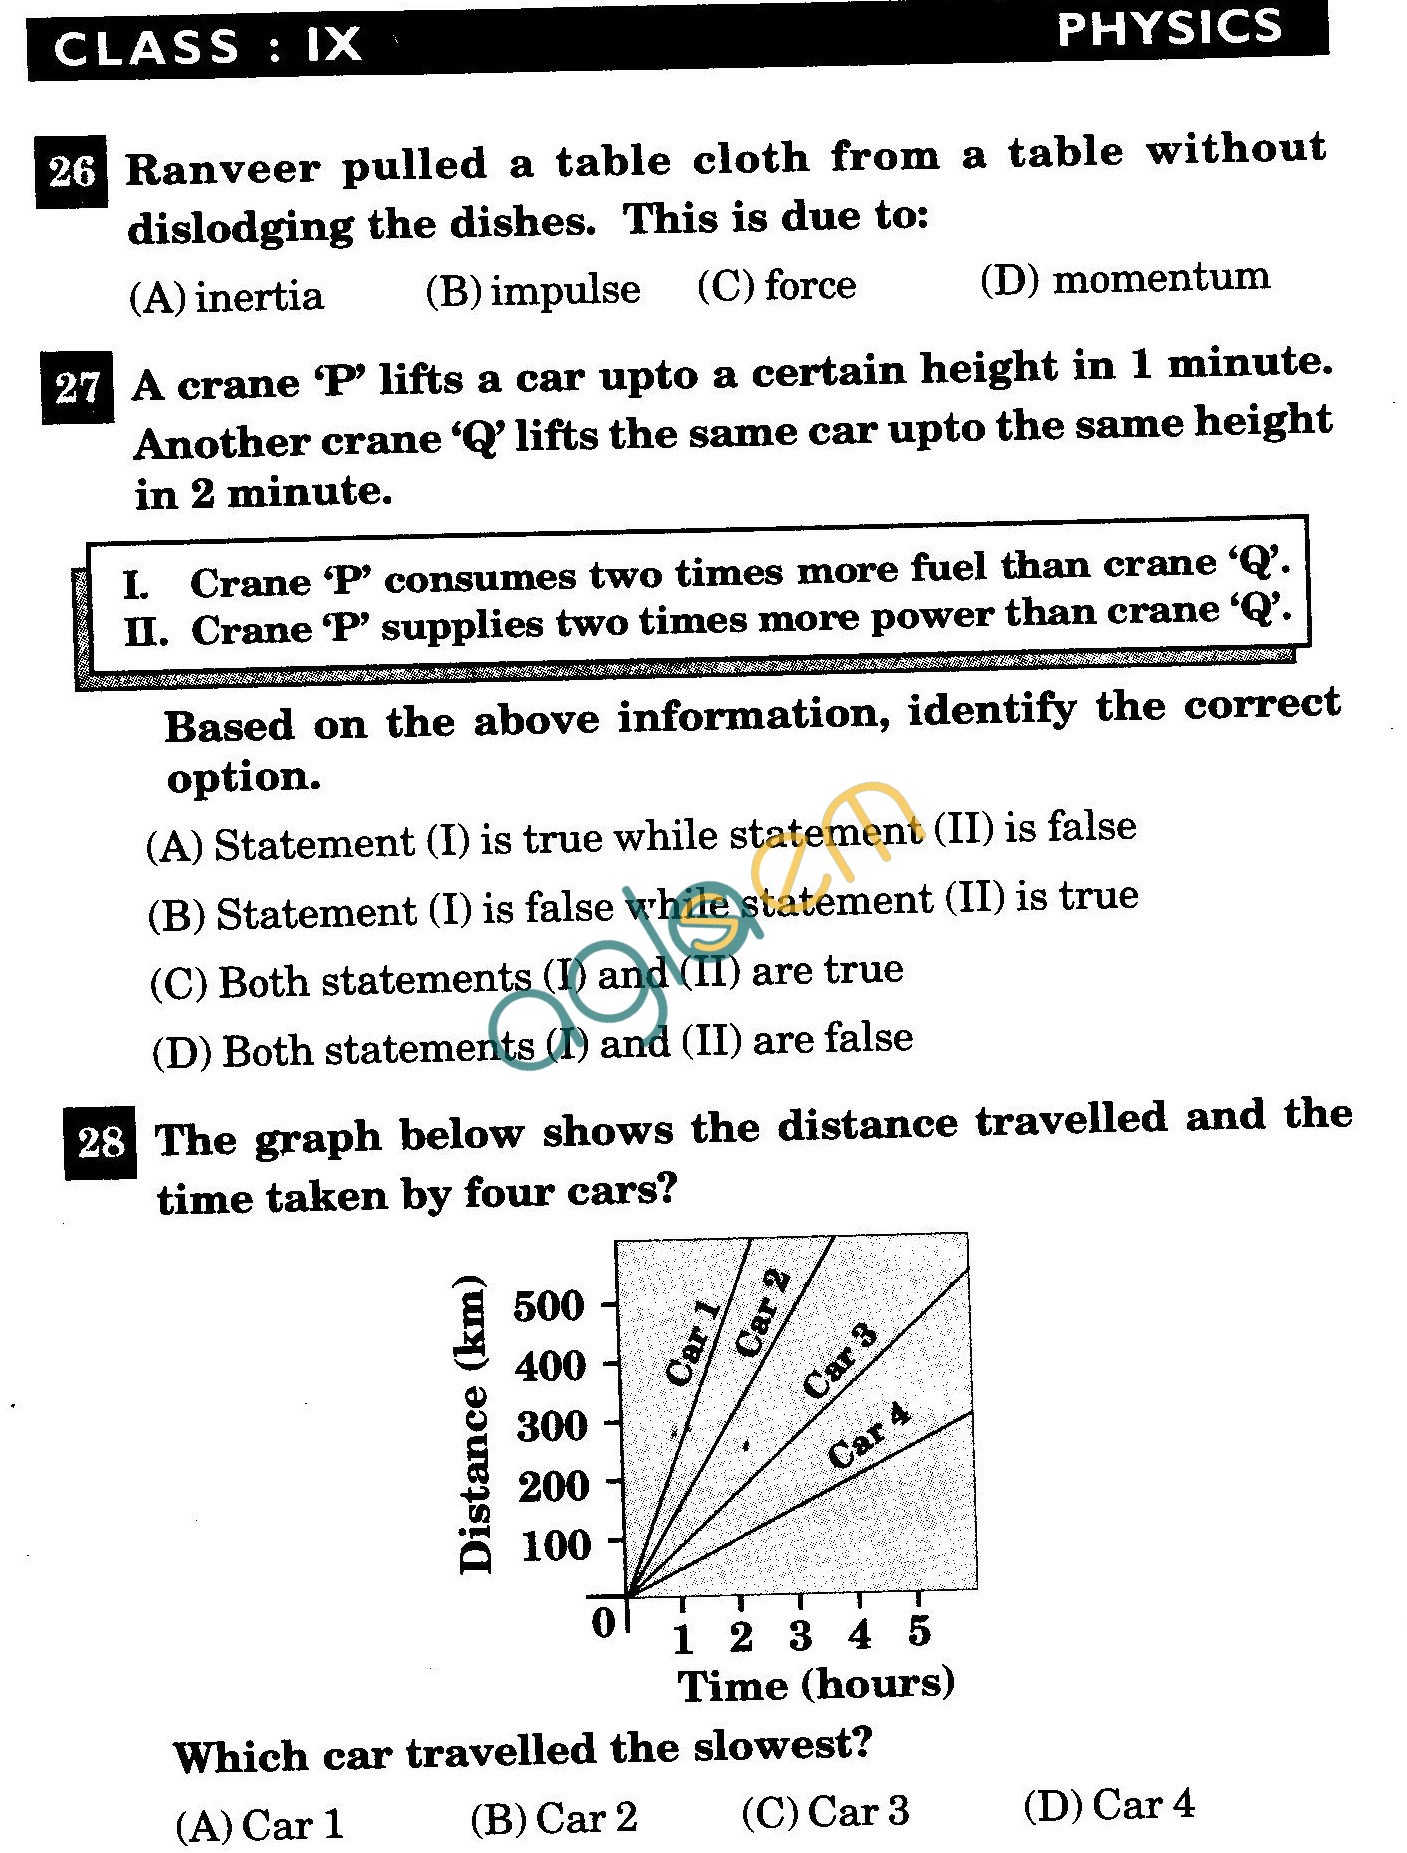 NSTSE 2011 Class IX Question Paper with Answers - Physics